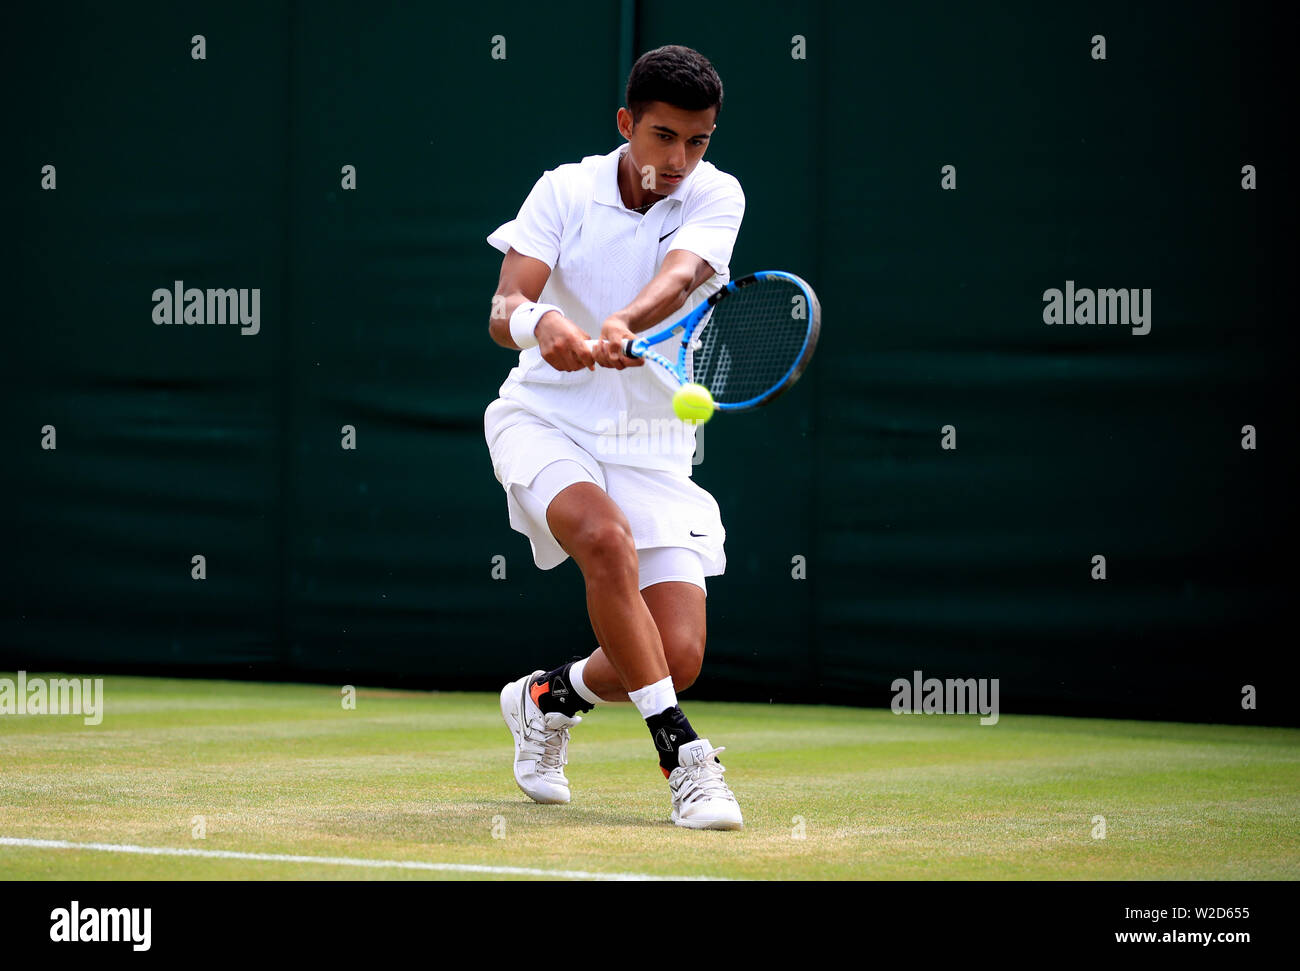 Nicolas Alvarez Varona in action against Felix Gill in the boys singles on day seven of the Wimbledon Championships at the All England Lawn Tennis and Croquet Club, Wimbledon Stock Photo -